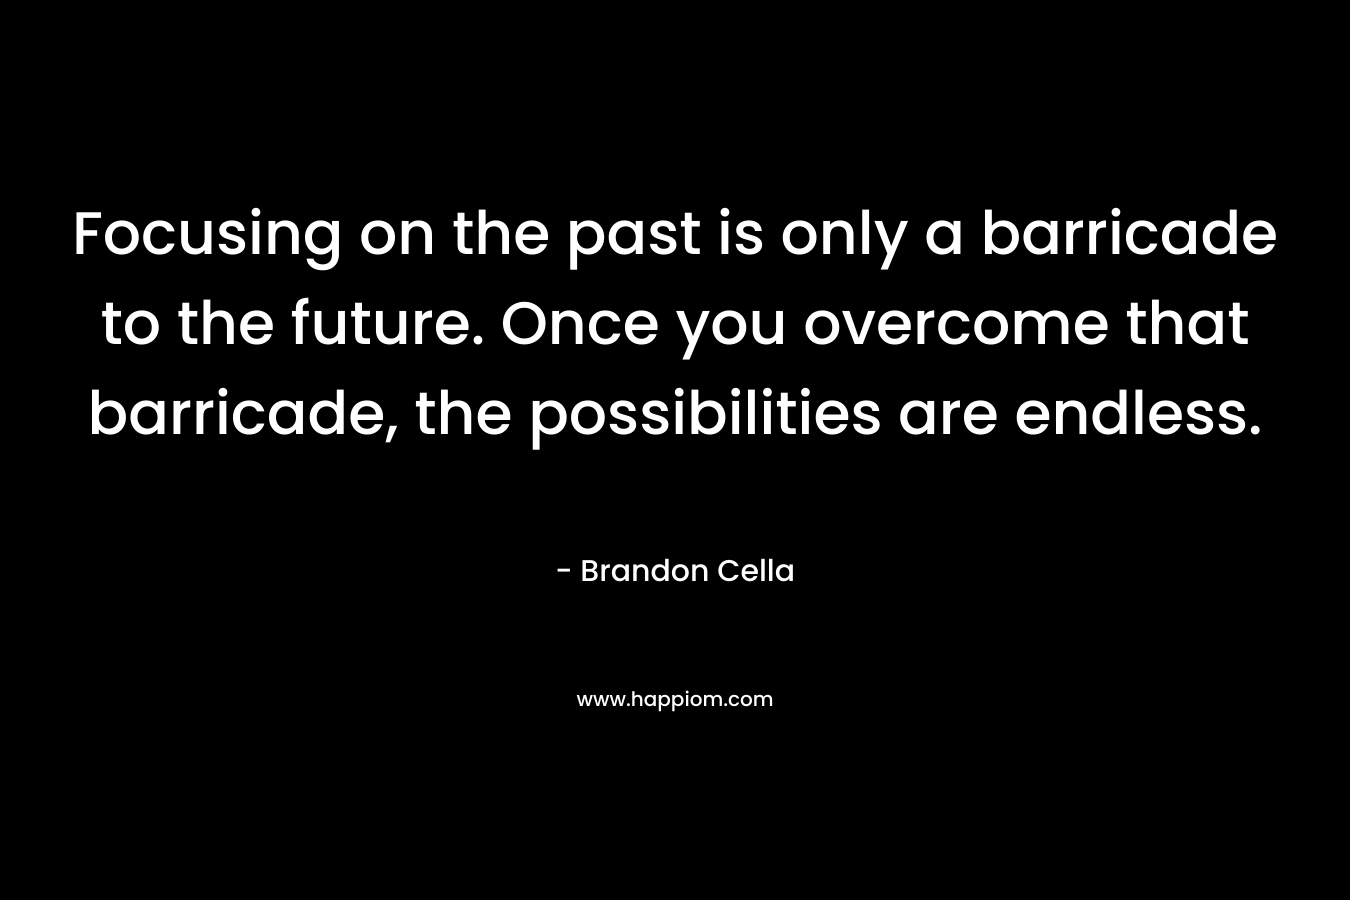 Focusing on the past is only a barricade to the future. Once you overcome that barricade, the possibilities are endless.